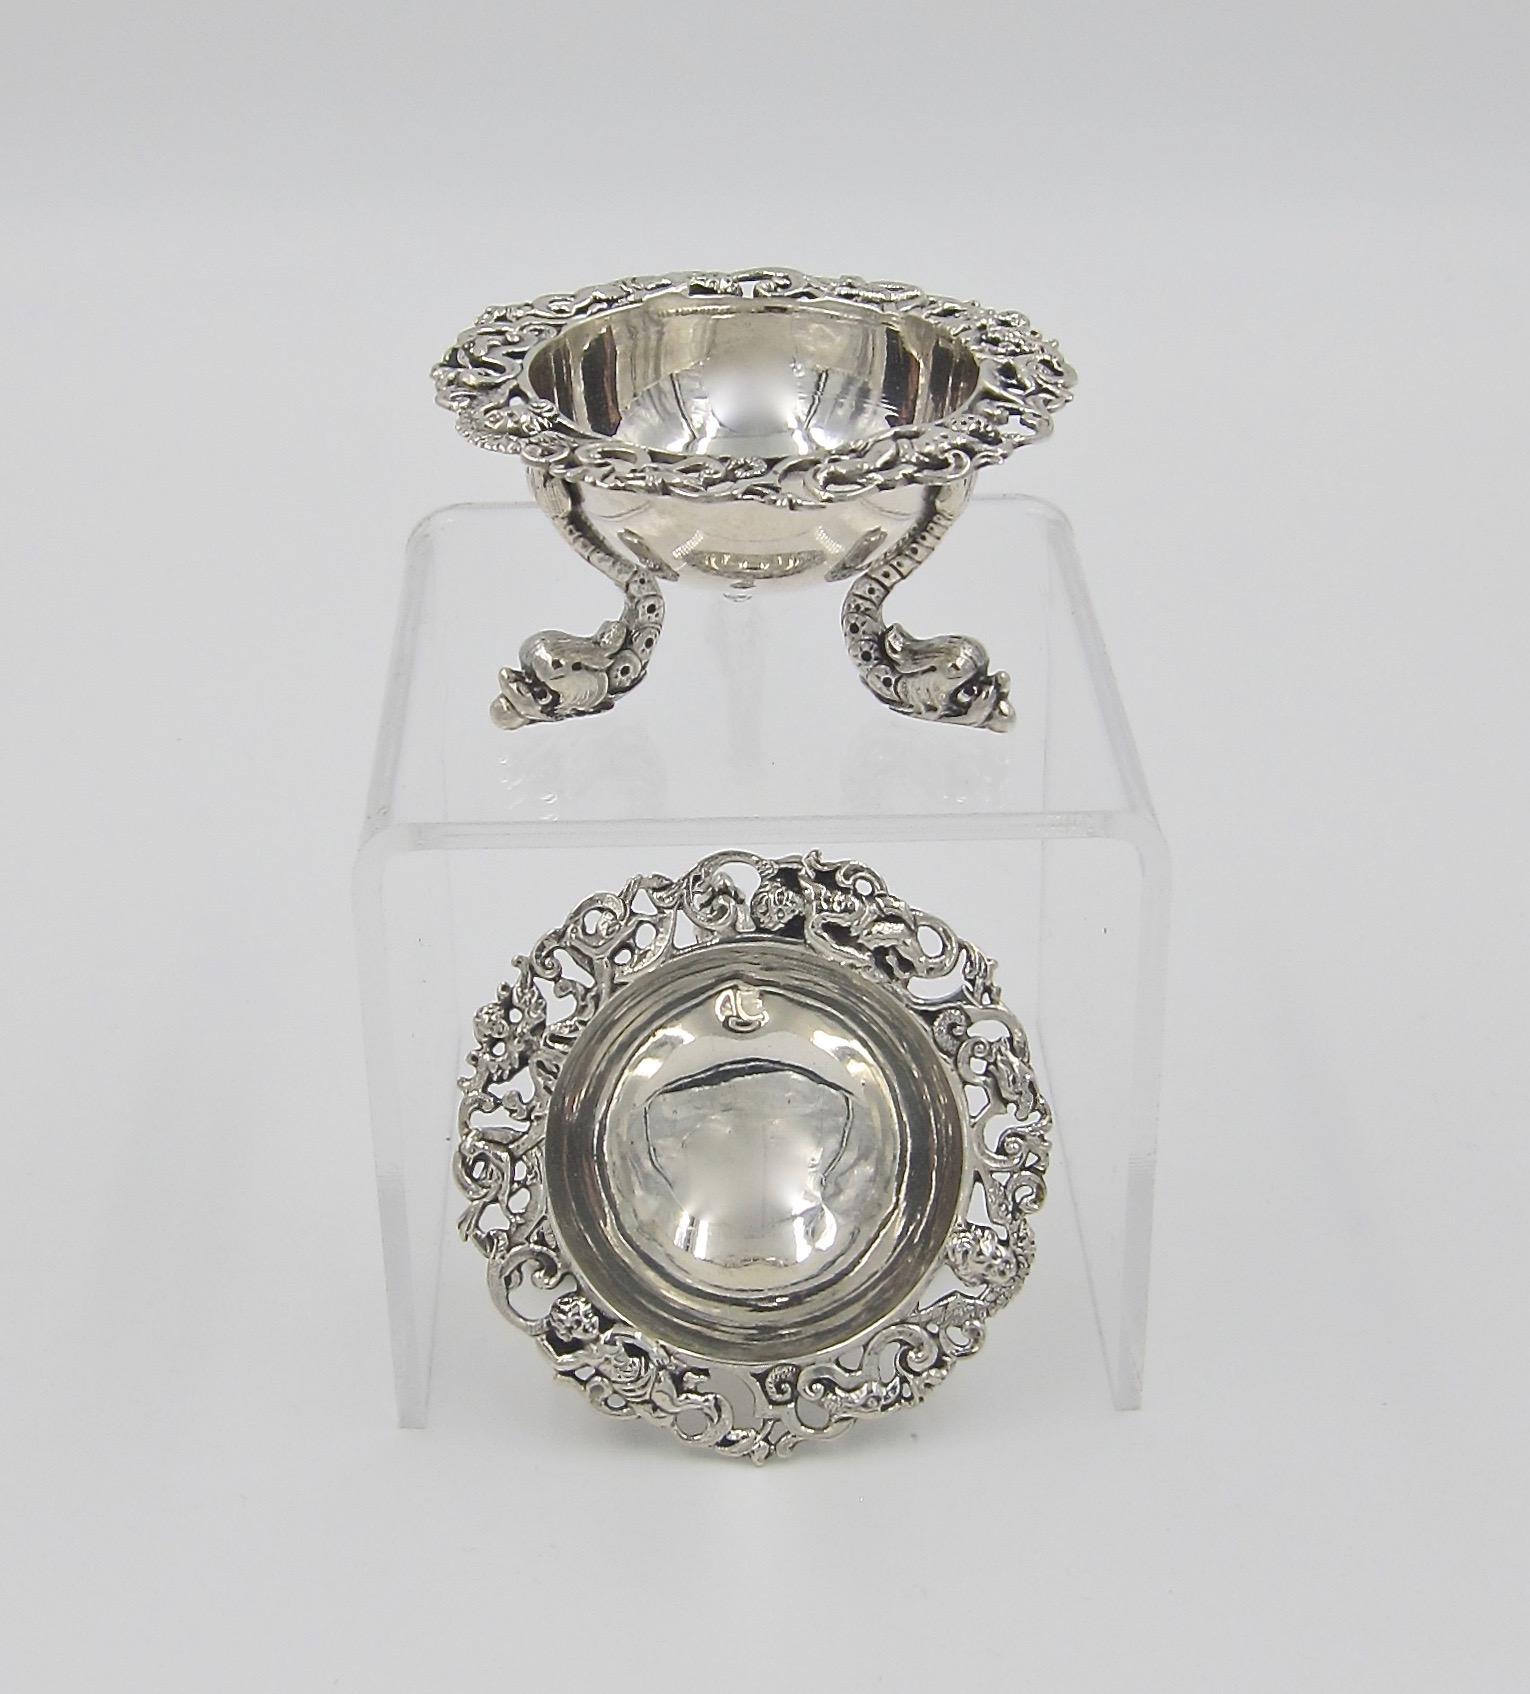 An antique pair of open salt cellars resting on three figural dolphin feet. Each salt is a simple bowl with a cast and pierced rim decorated with cherubs and scrolls. Each bowl is stamped on the underside with the letter 